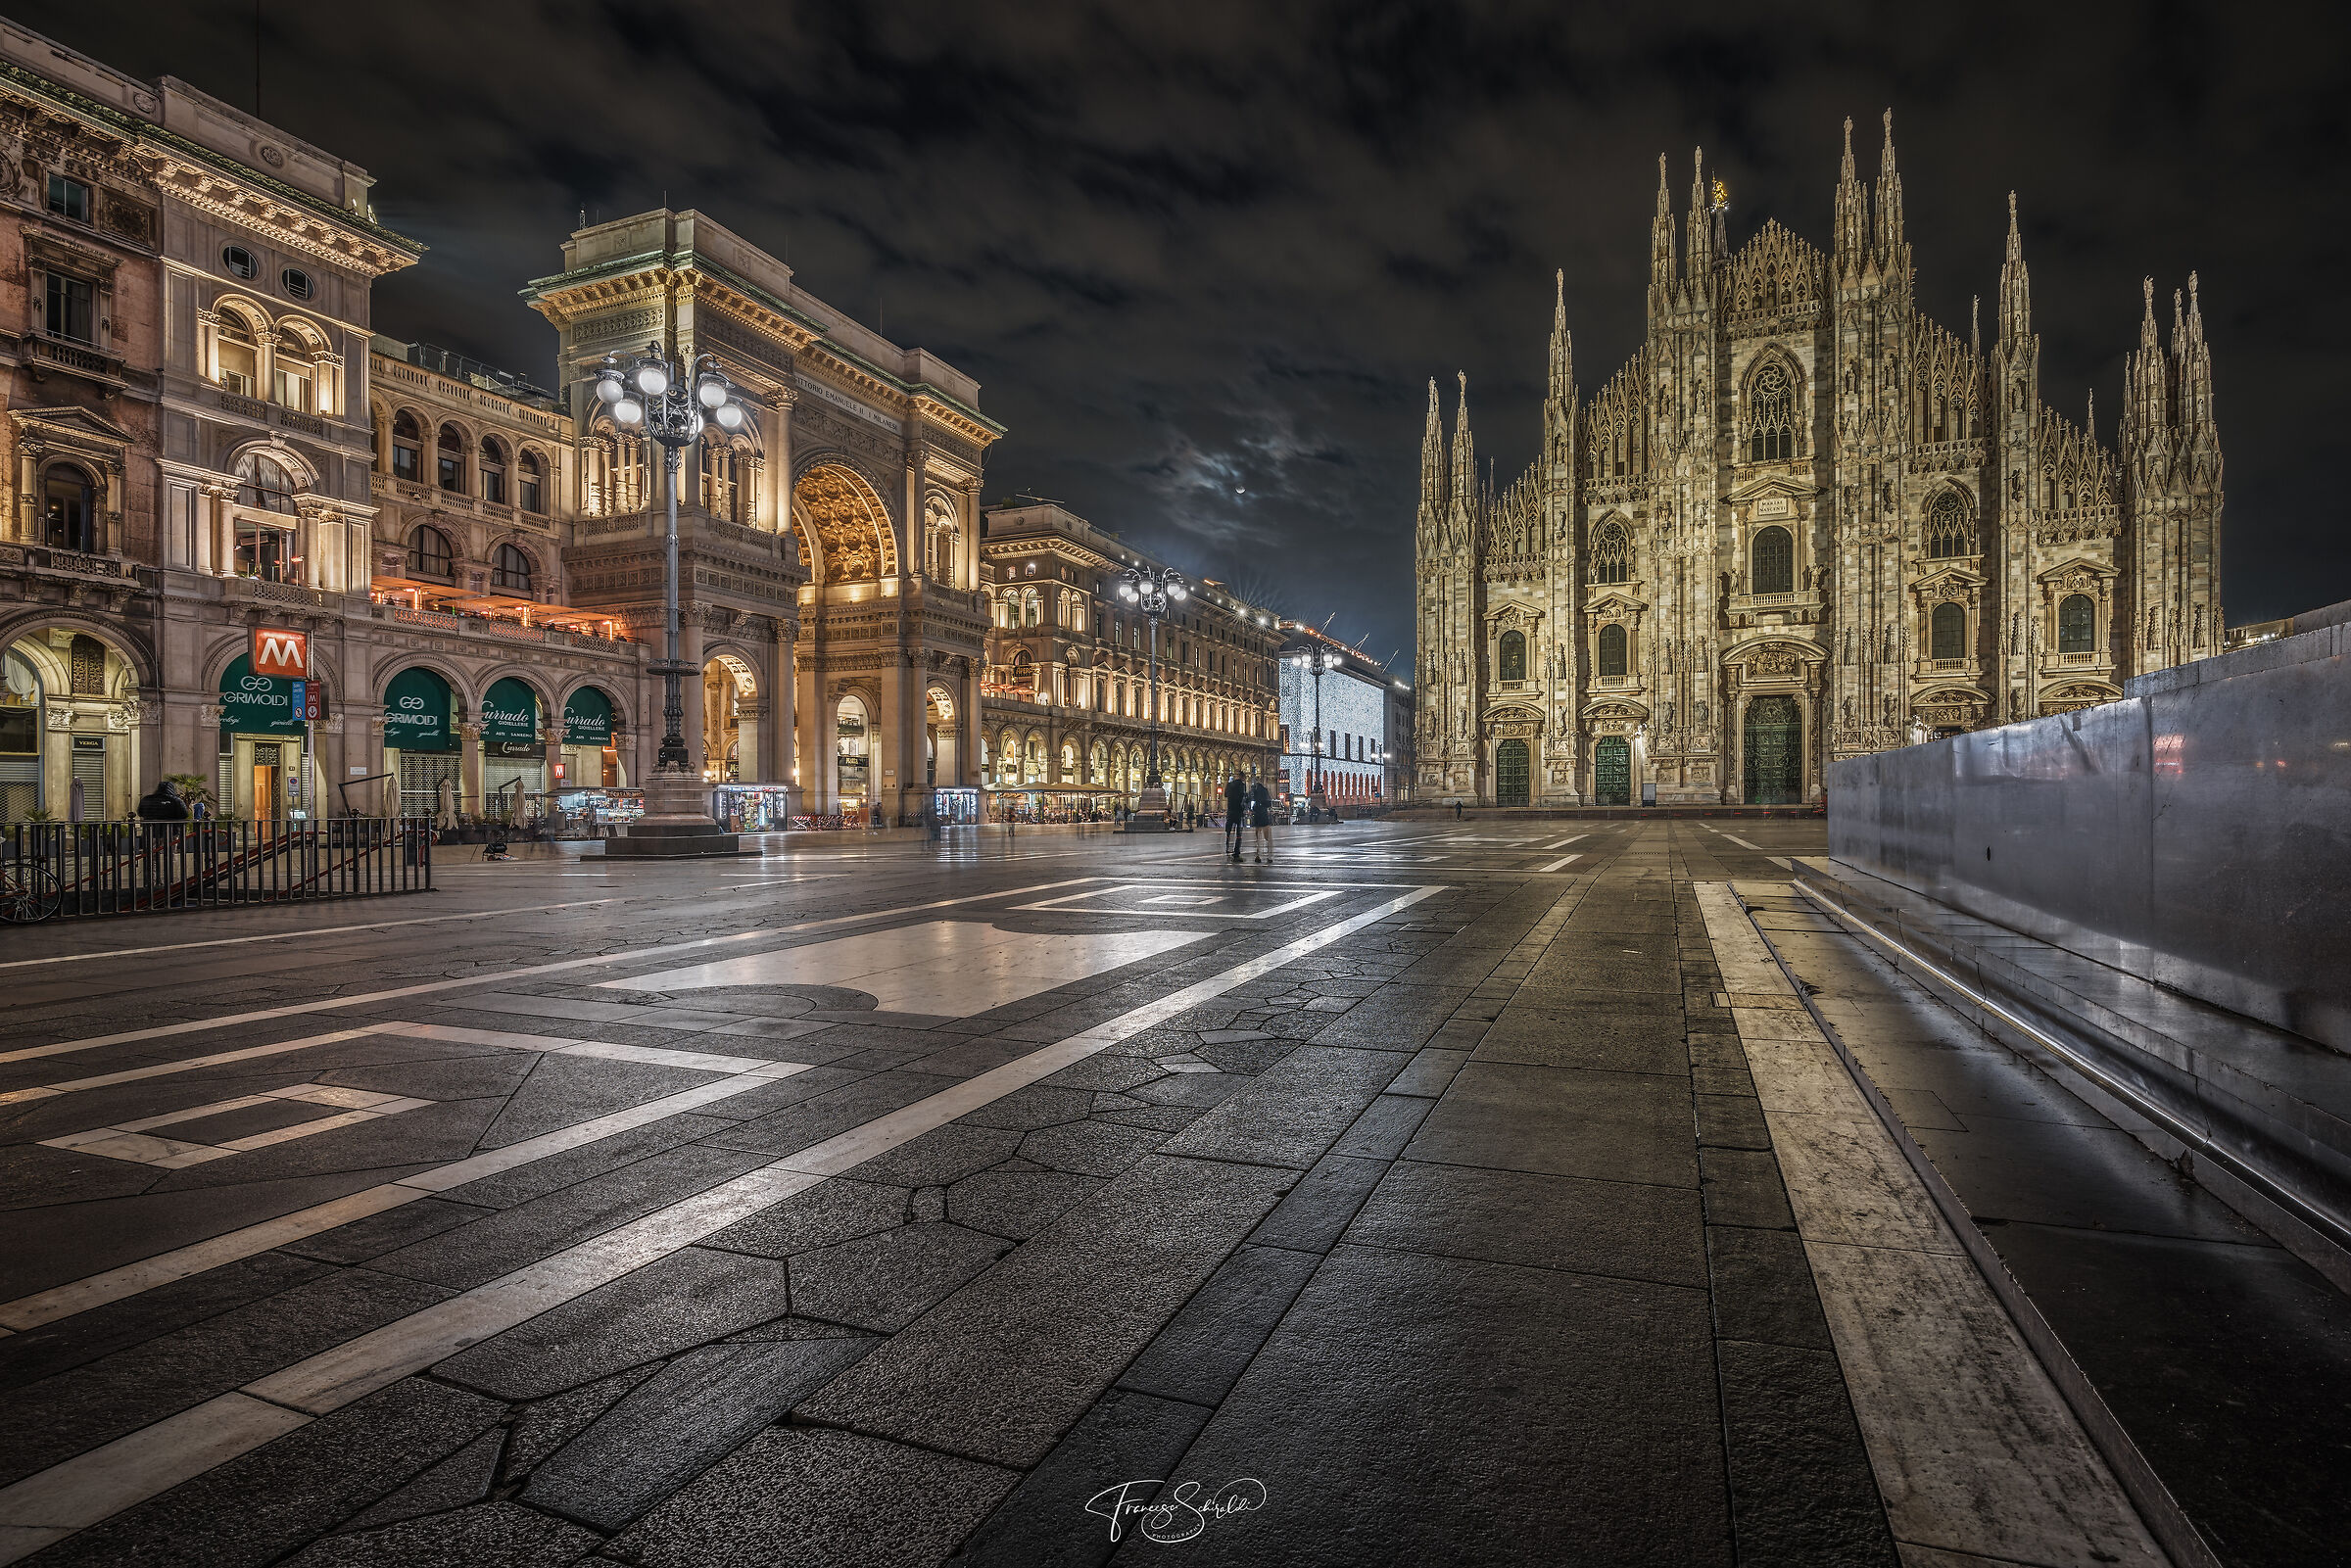 The magnificent Duomo of Milan...